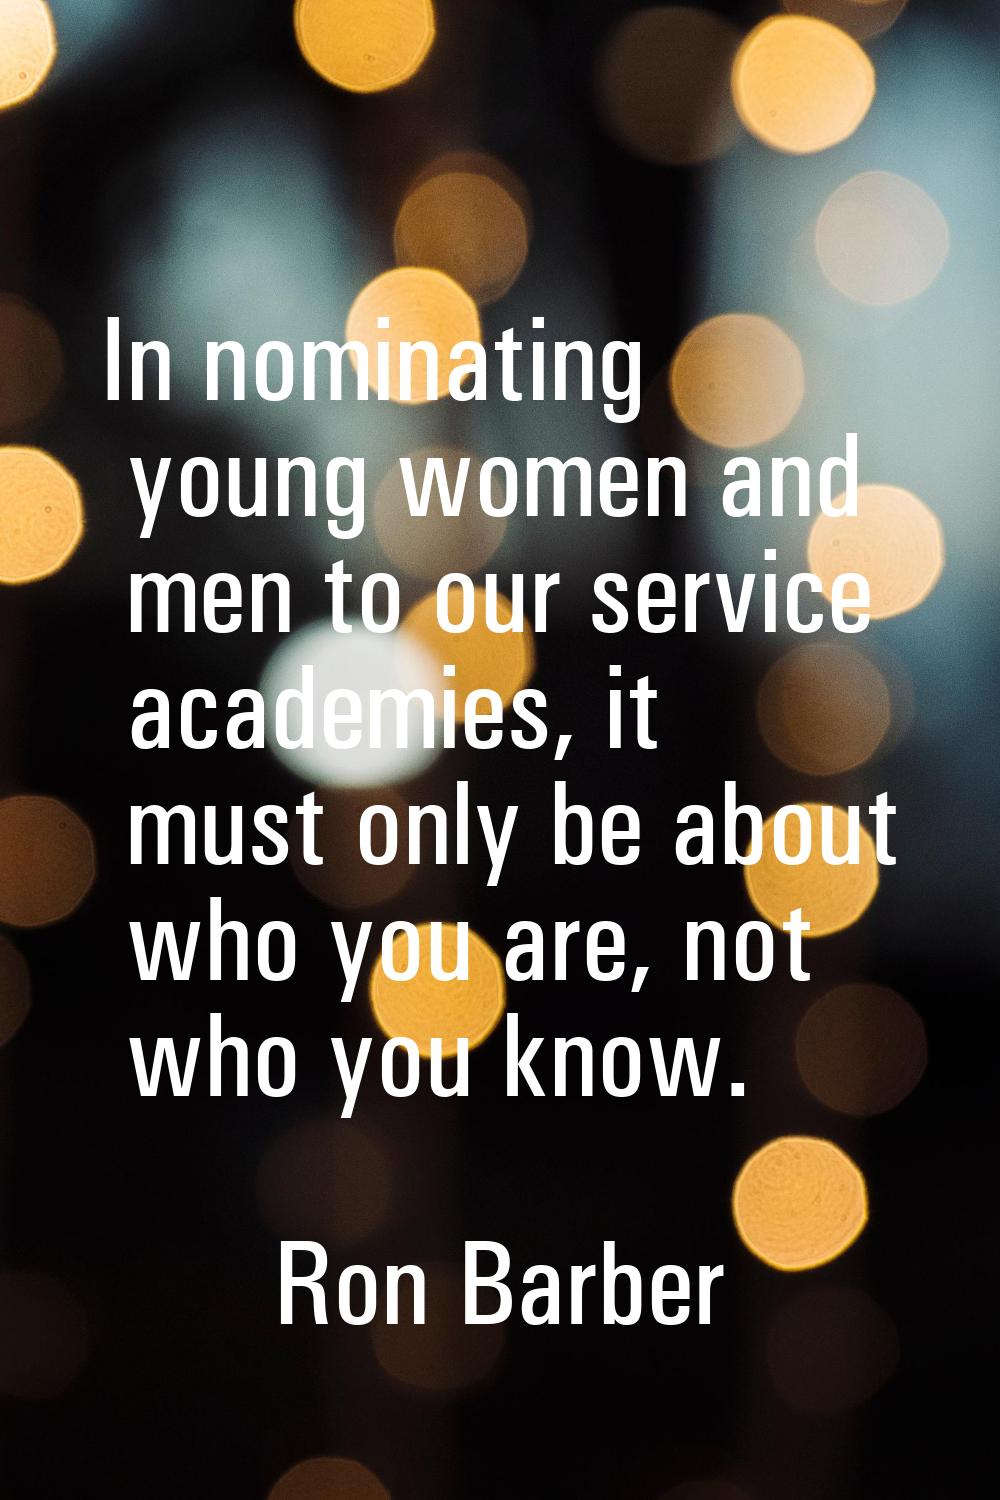 In nominating young women and men to our service academies, it must only be about who you are, not 